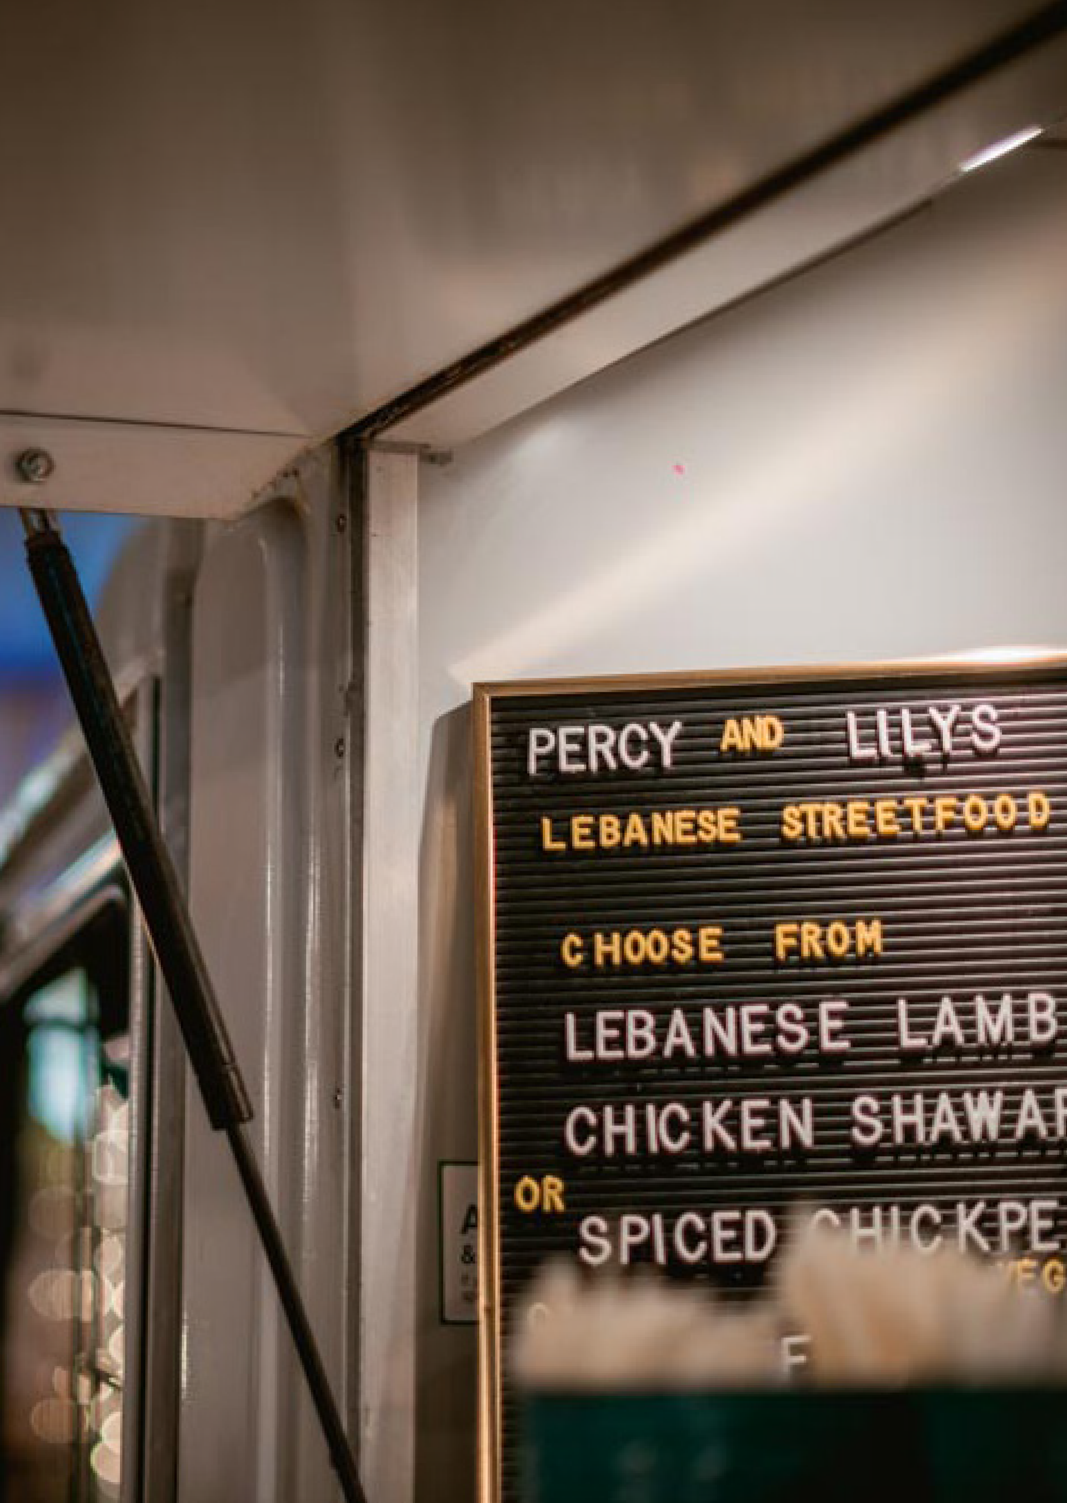 Percy-and-Lily-street-food-menu-V3-1.png